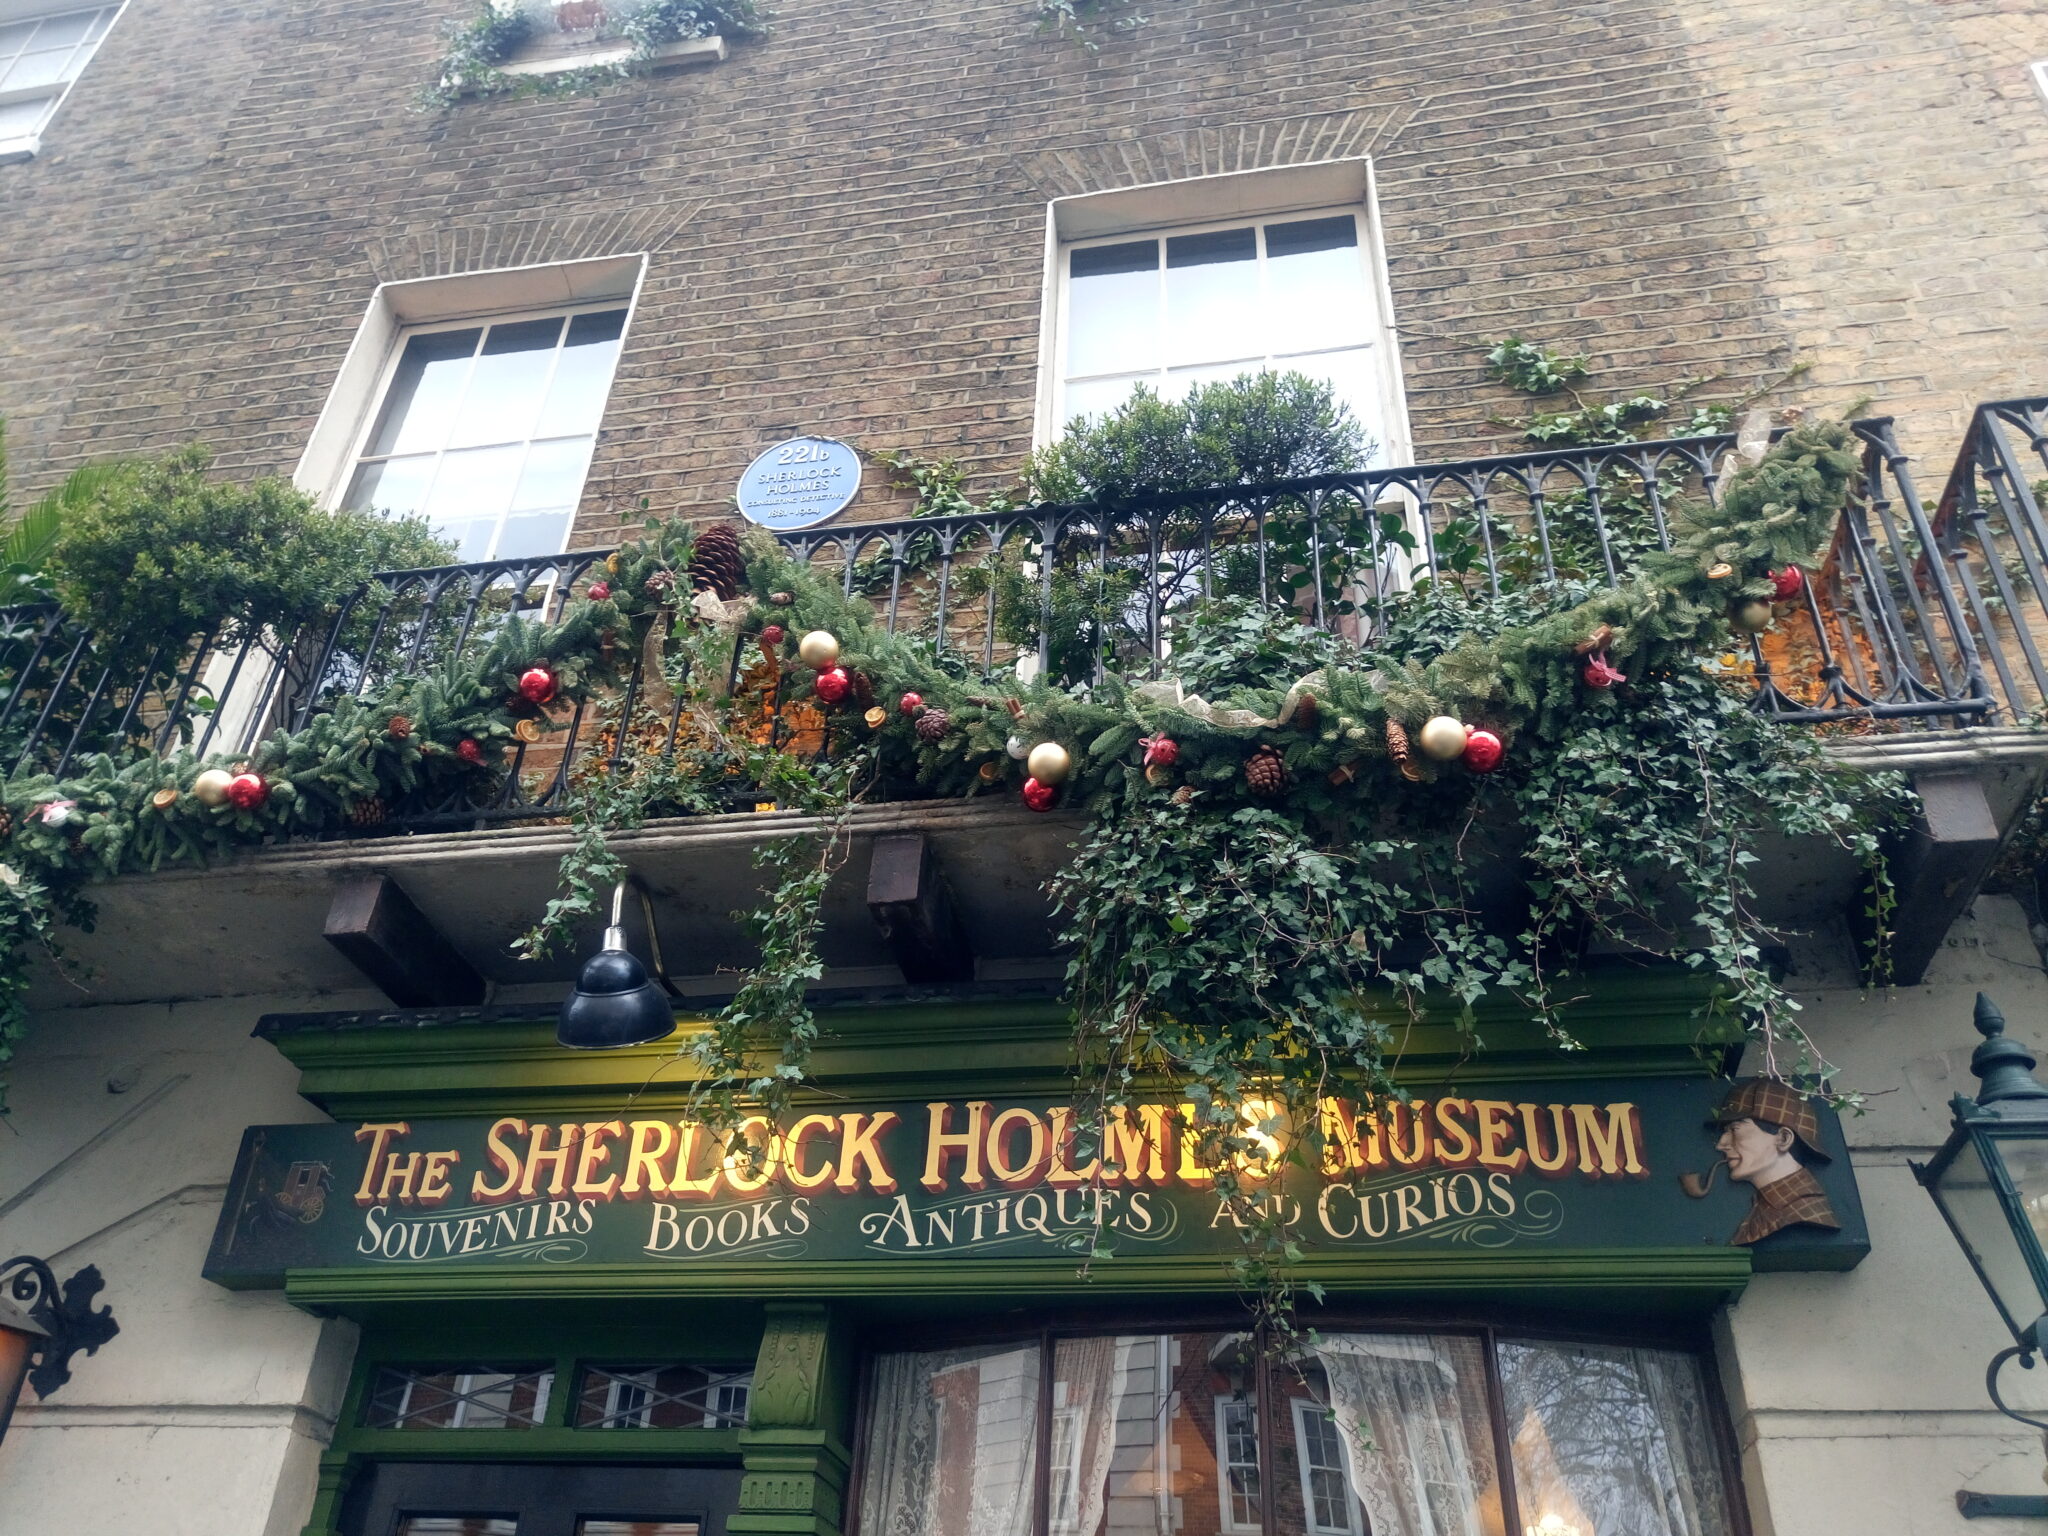 The facade of the Sherlock Holmes Museum filled with vines and Christmas decors.